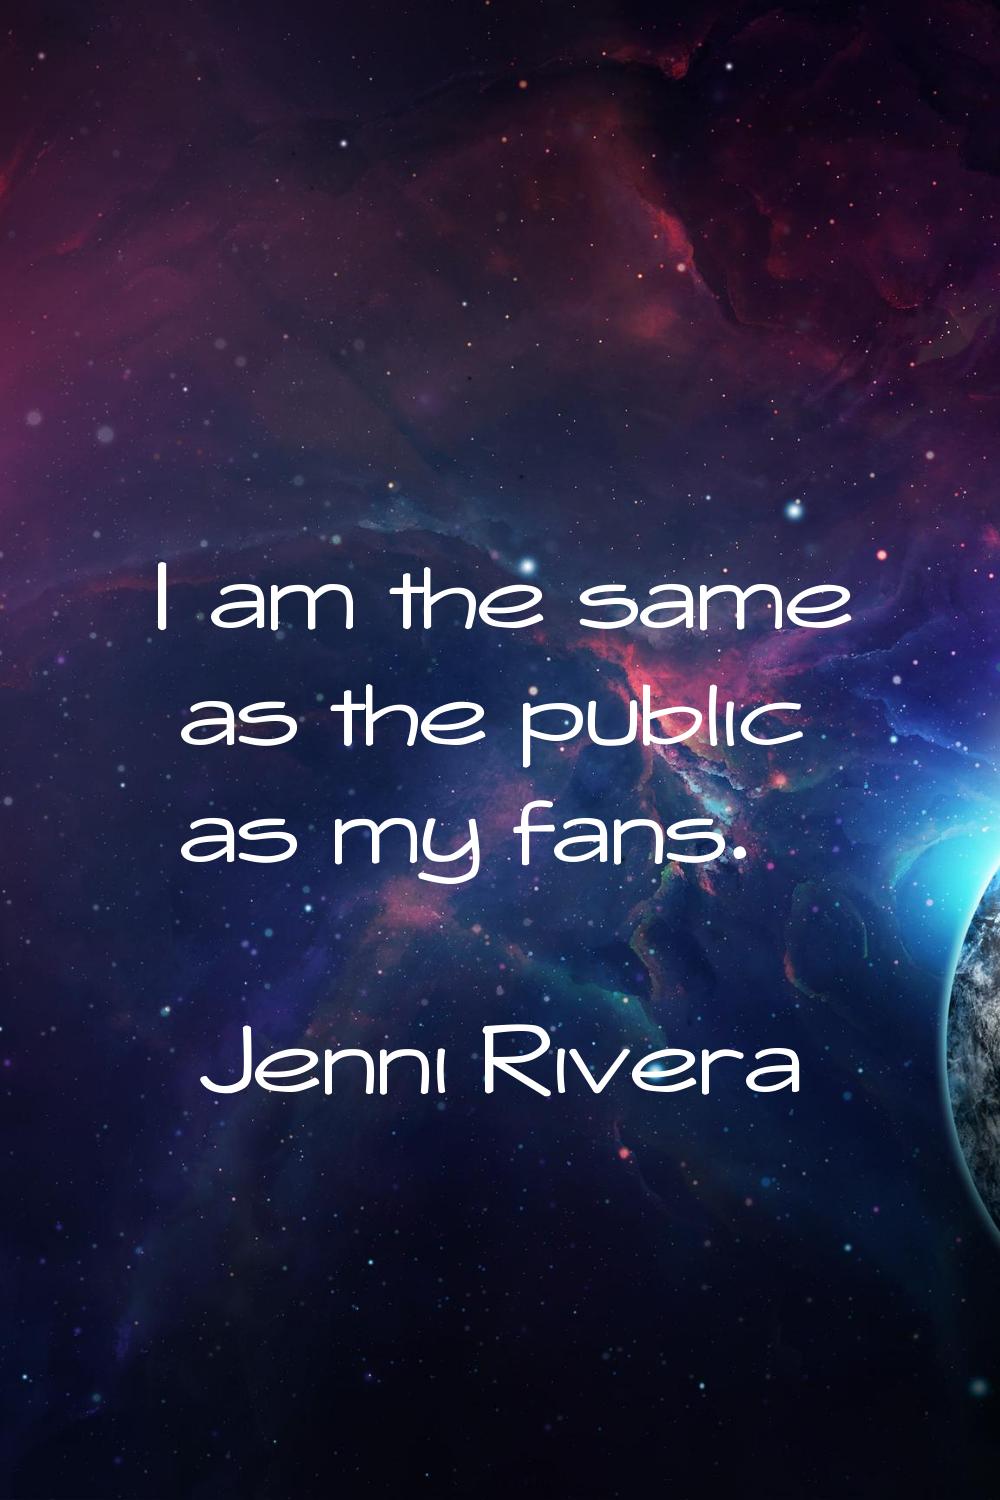 I am the same as the public as my fans.